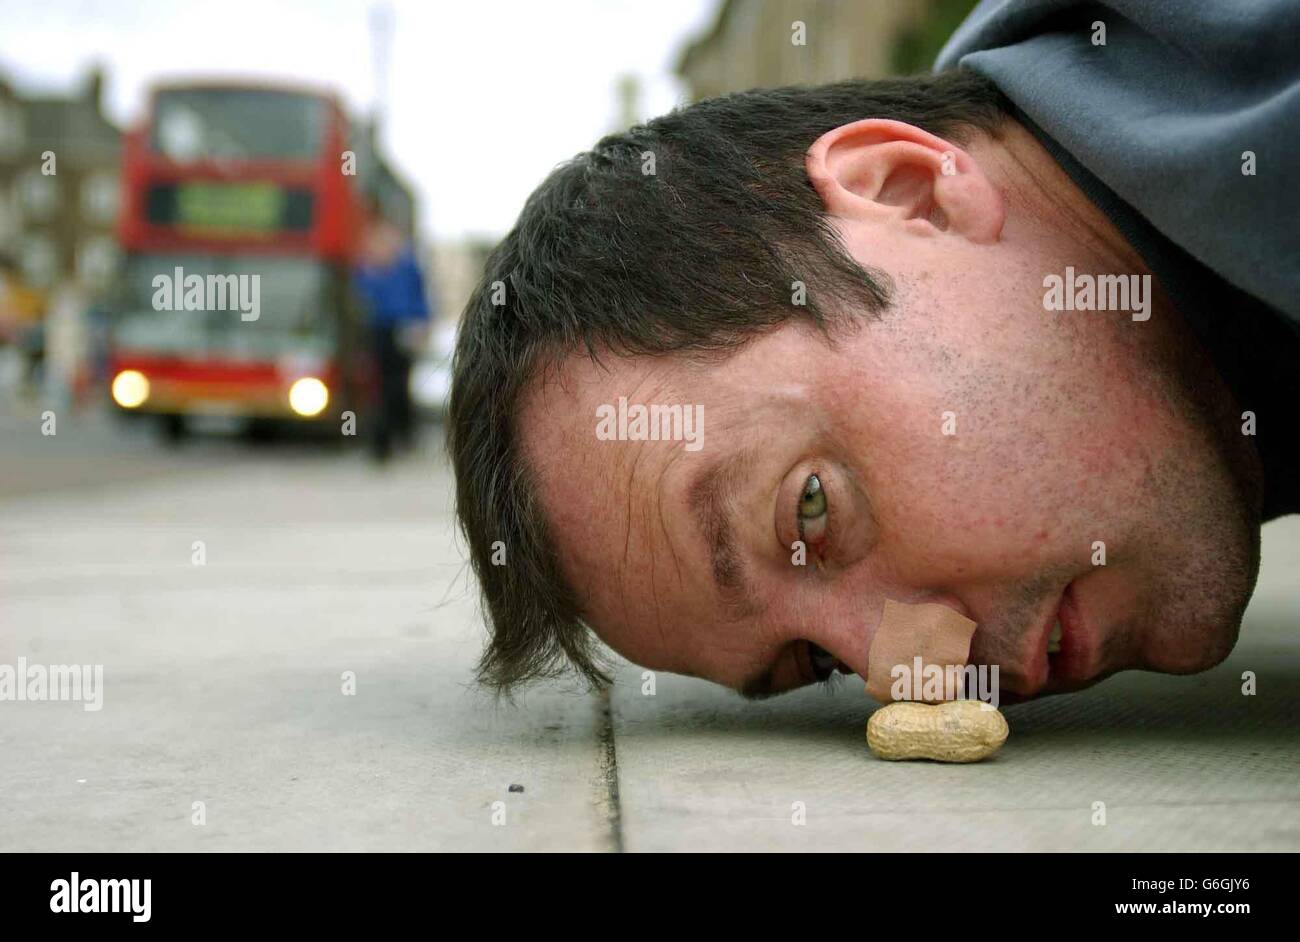 Student Mark McGowan, 37, from Peckham, gets down to business as he attempts to wipe out his student debt by using his nose to push a monkey nut seven miles to Downing Street, central London. McGowan wants the Prime Minister to waive his 15,000 debts if he can make it from Goldsmiths College , south-east London to 10 Downing Street. Mr McGowan knows he can make it with all manner of hazards he faces, most dangerous of all crossing roads. Stock Photo